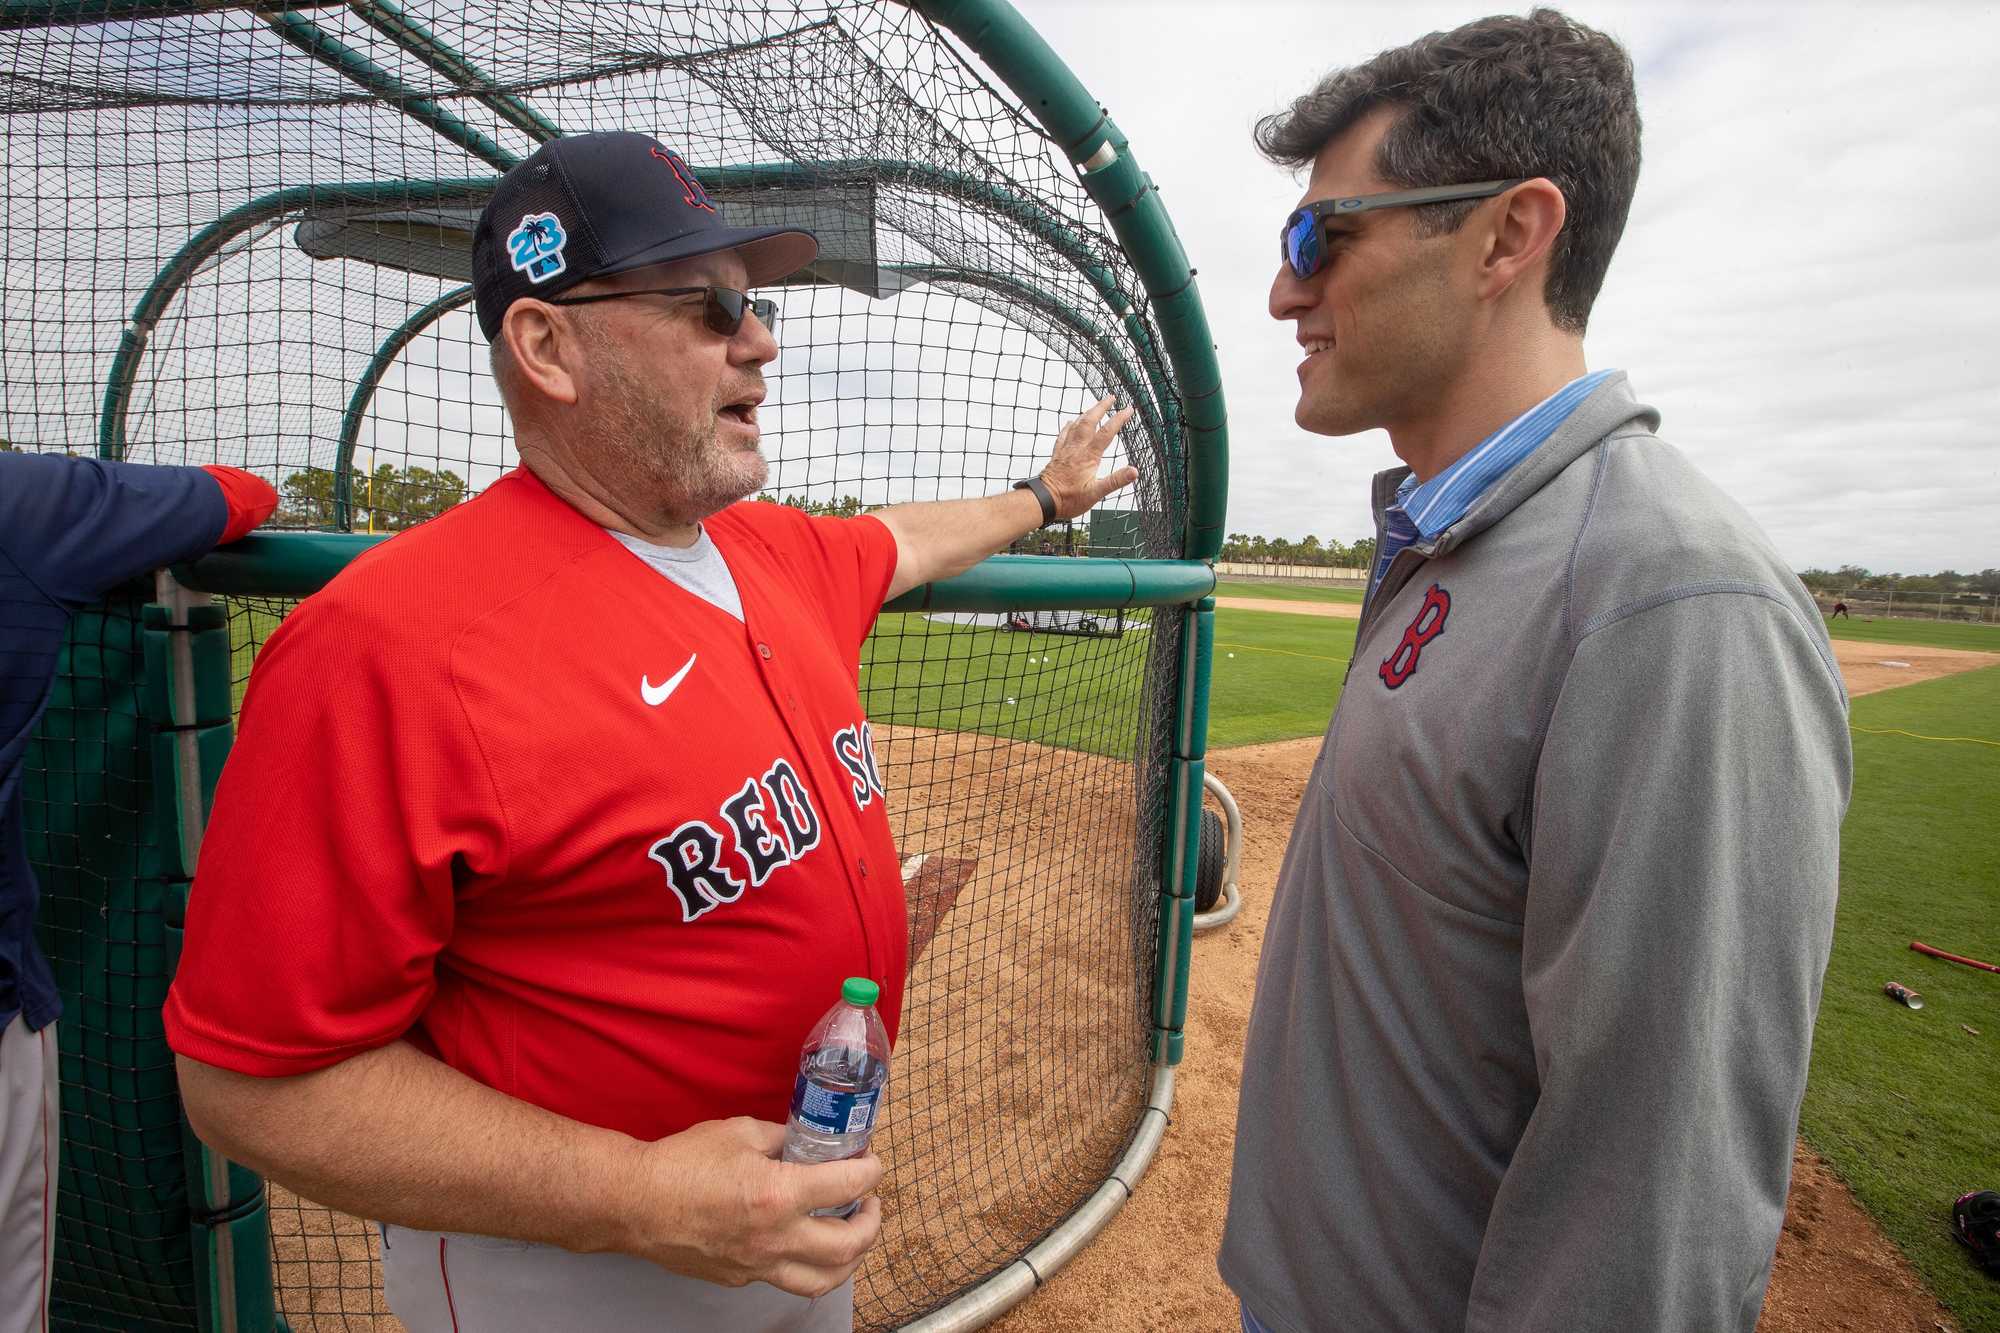 Chaim Bloom (right) chatted with minor league coach Rich Gedman during spring training. The Red Sox have worked to shore up resources within their coaching and development ranks to better compete with top teams.